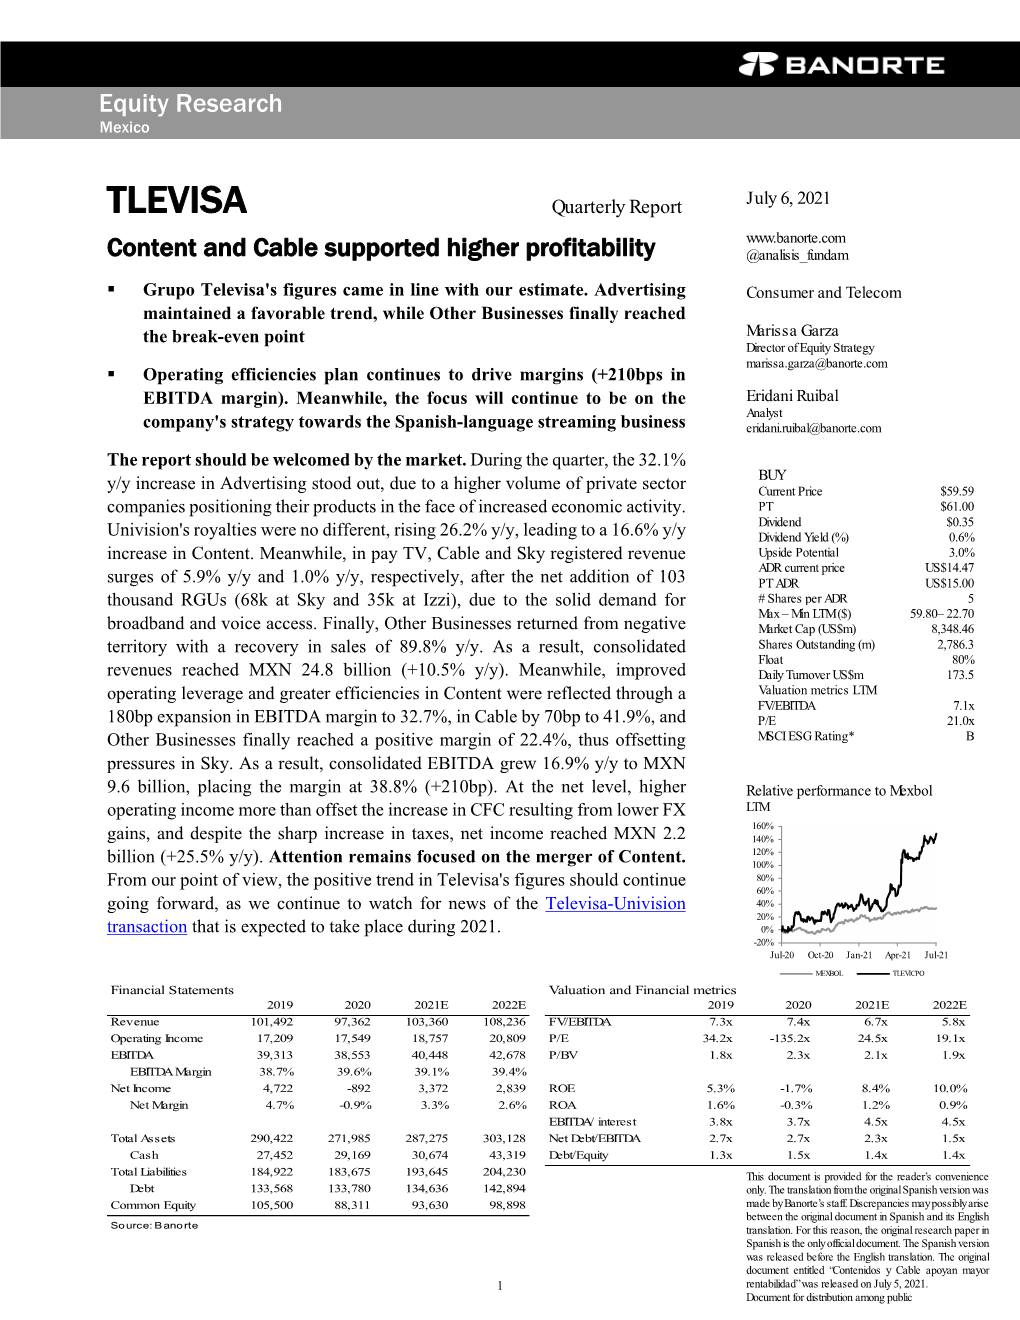 TLEVISA Content and Cable Supported Higher Profitability @Analisis Fundam